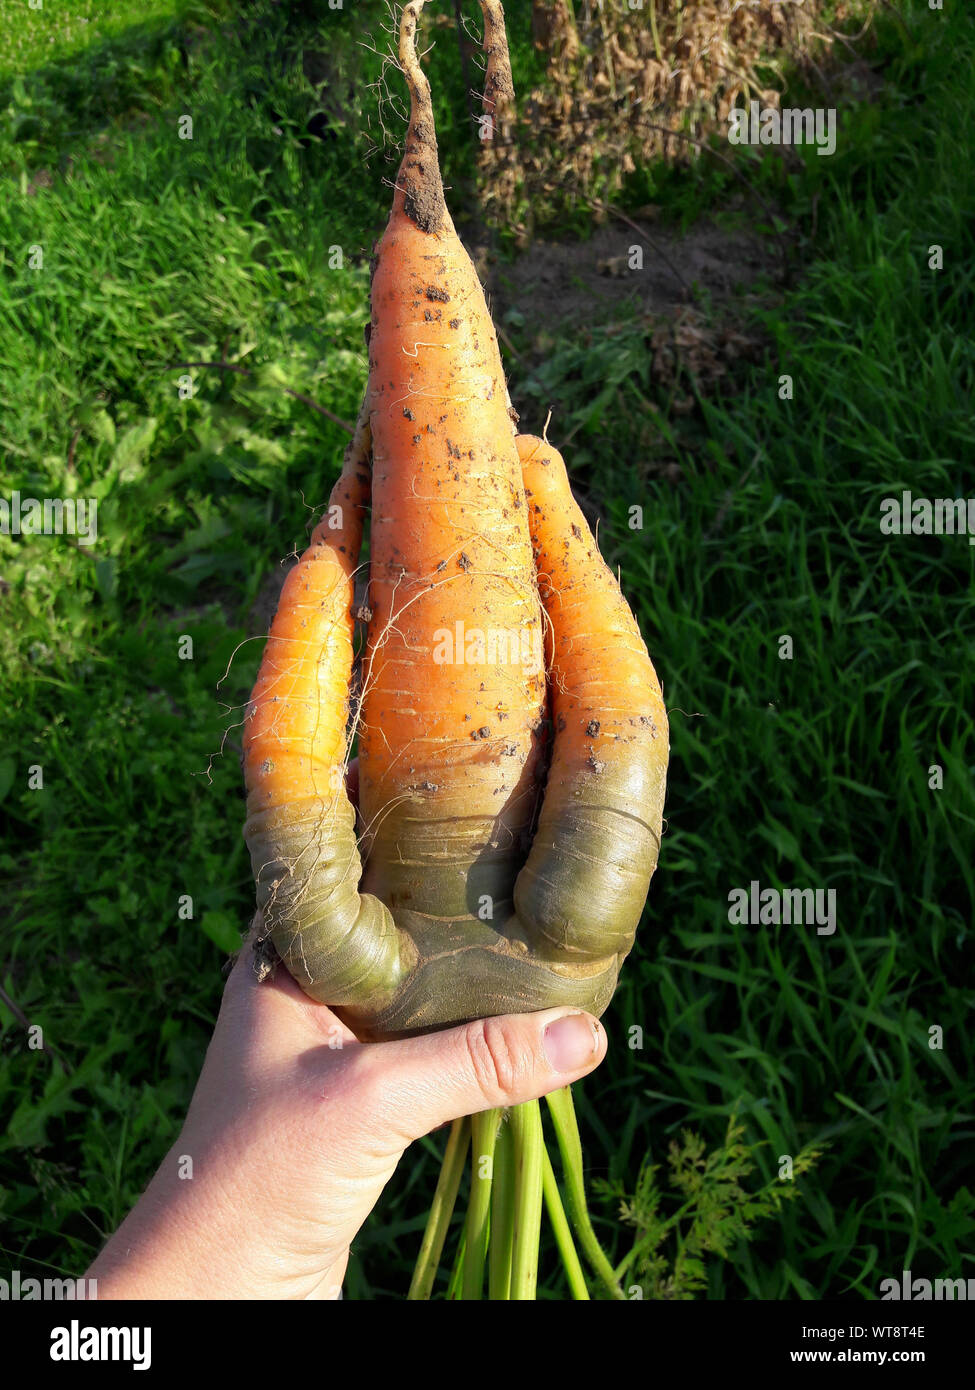 Odd looking weird mutant uneven carrots in hand outdoors, green grass on the background. Rejected food in markets stores concept. Low quality foods. Stock Photo